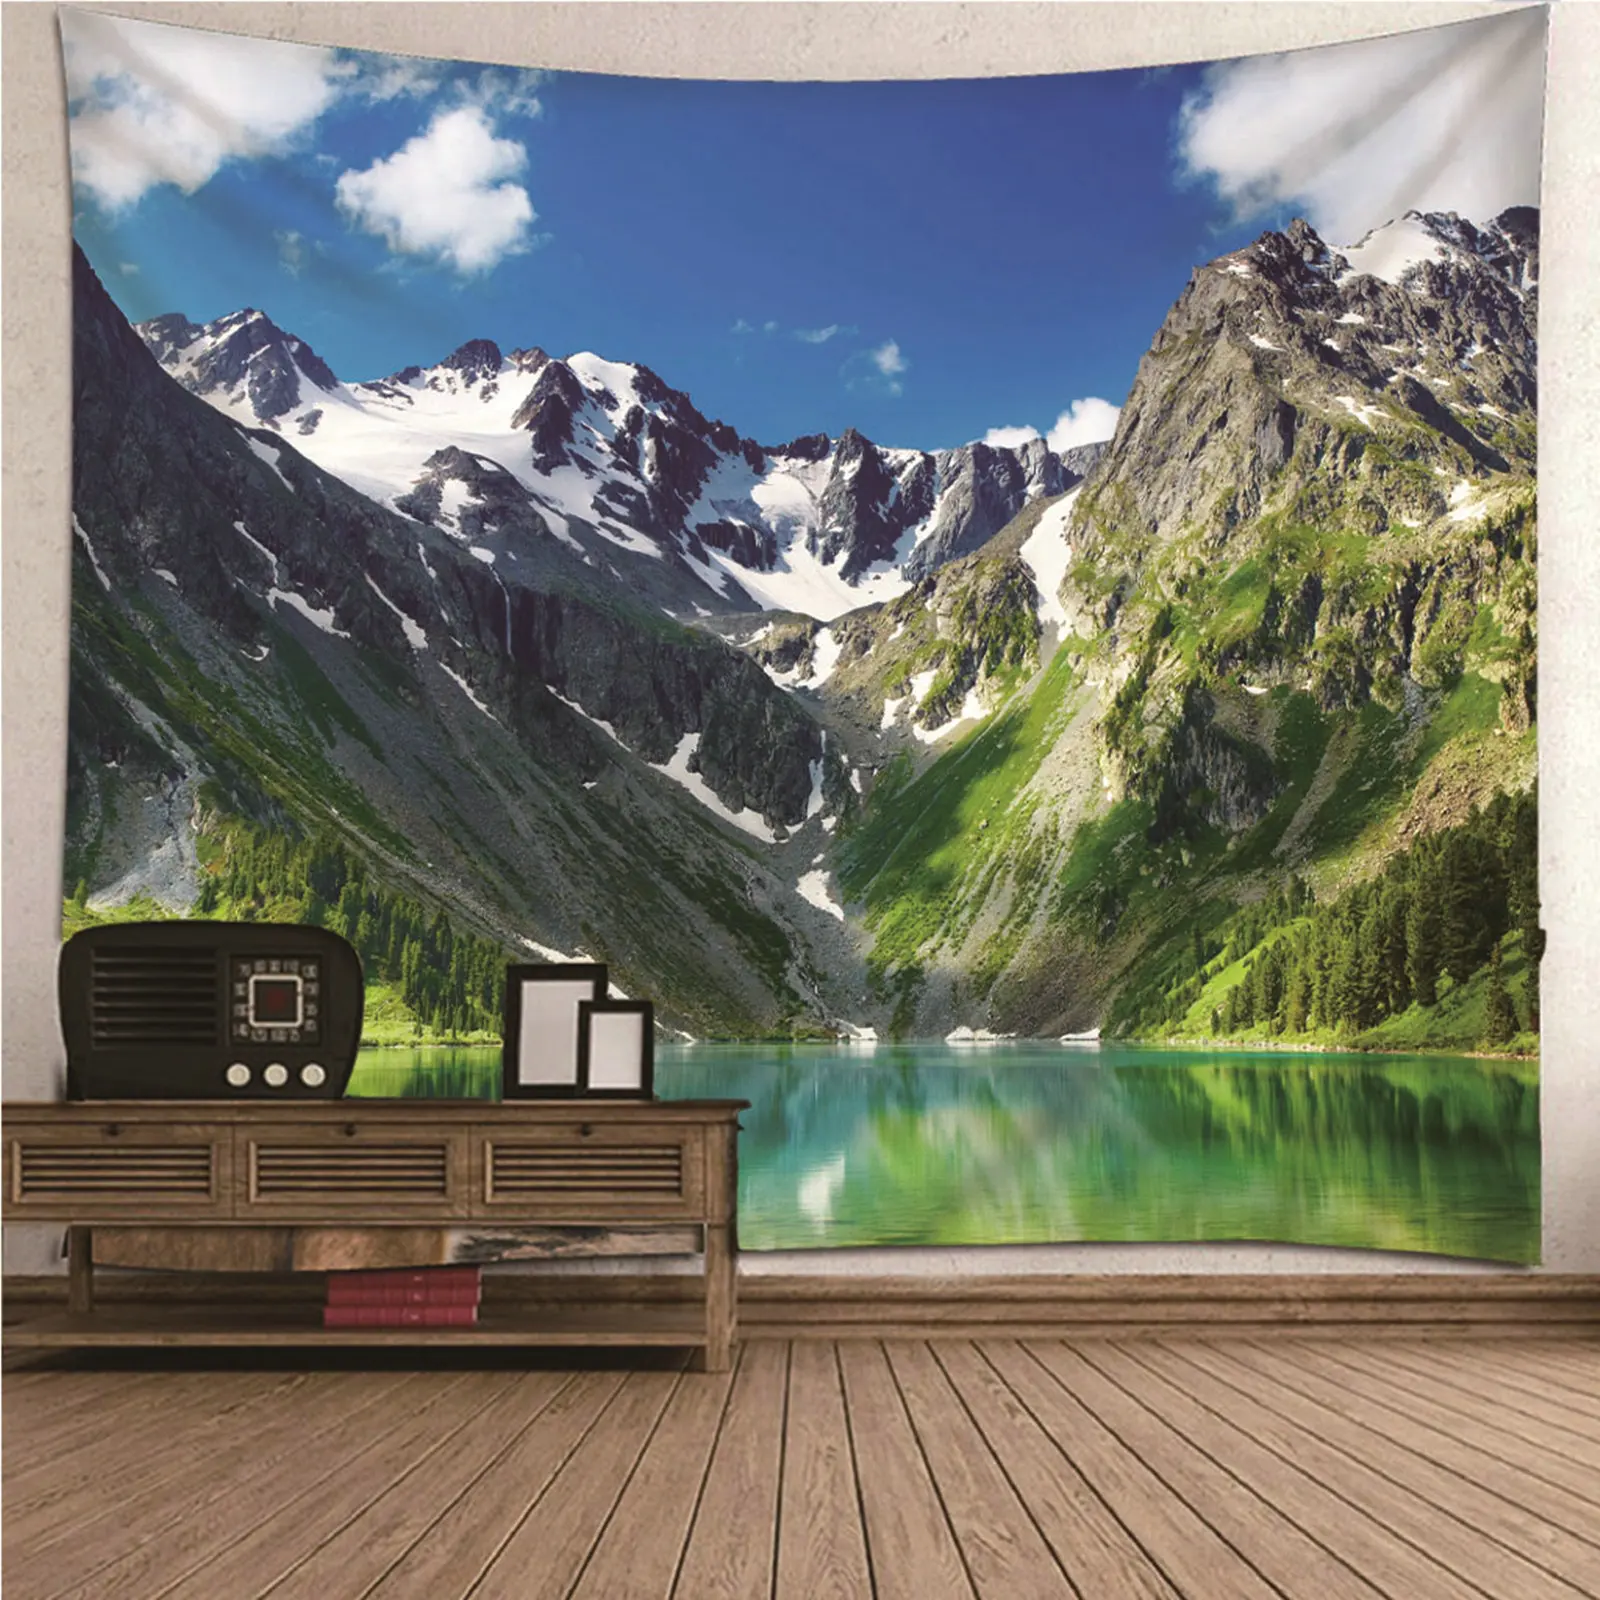 

Tapestry Large 3D Stickers Wall Decor natural scenery Valley Scenery Wall Hanging Blanket Dorm Art Decor Covering